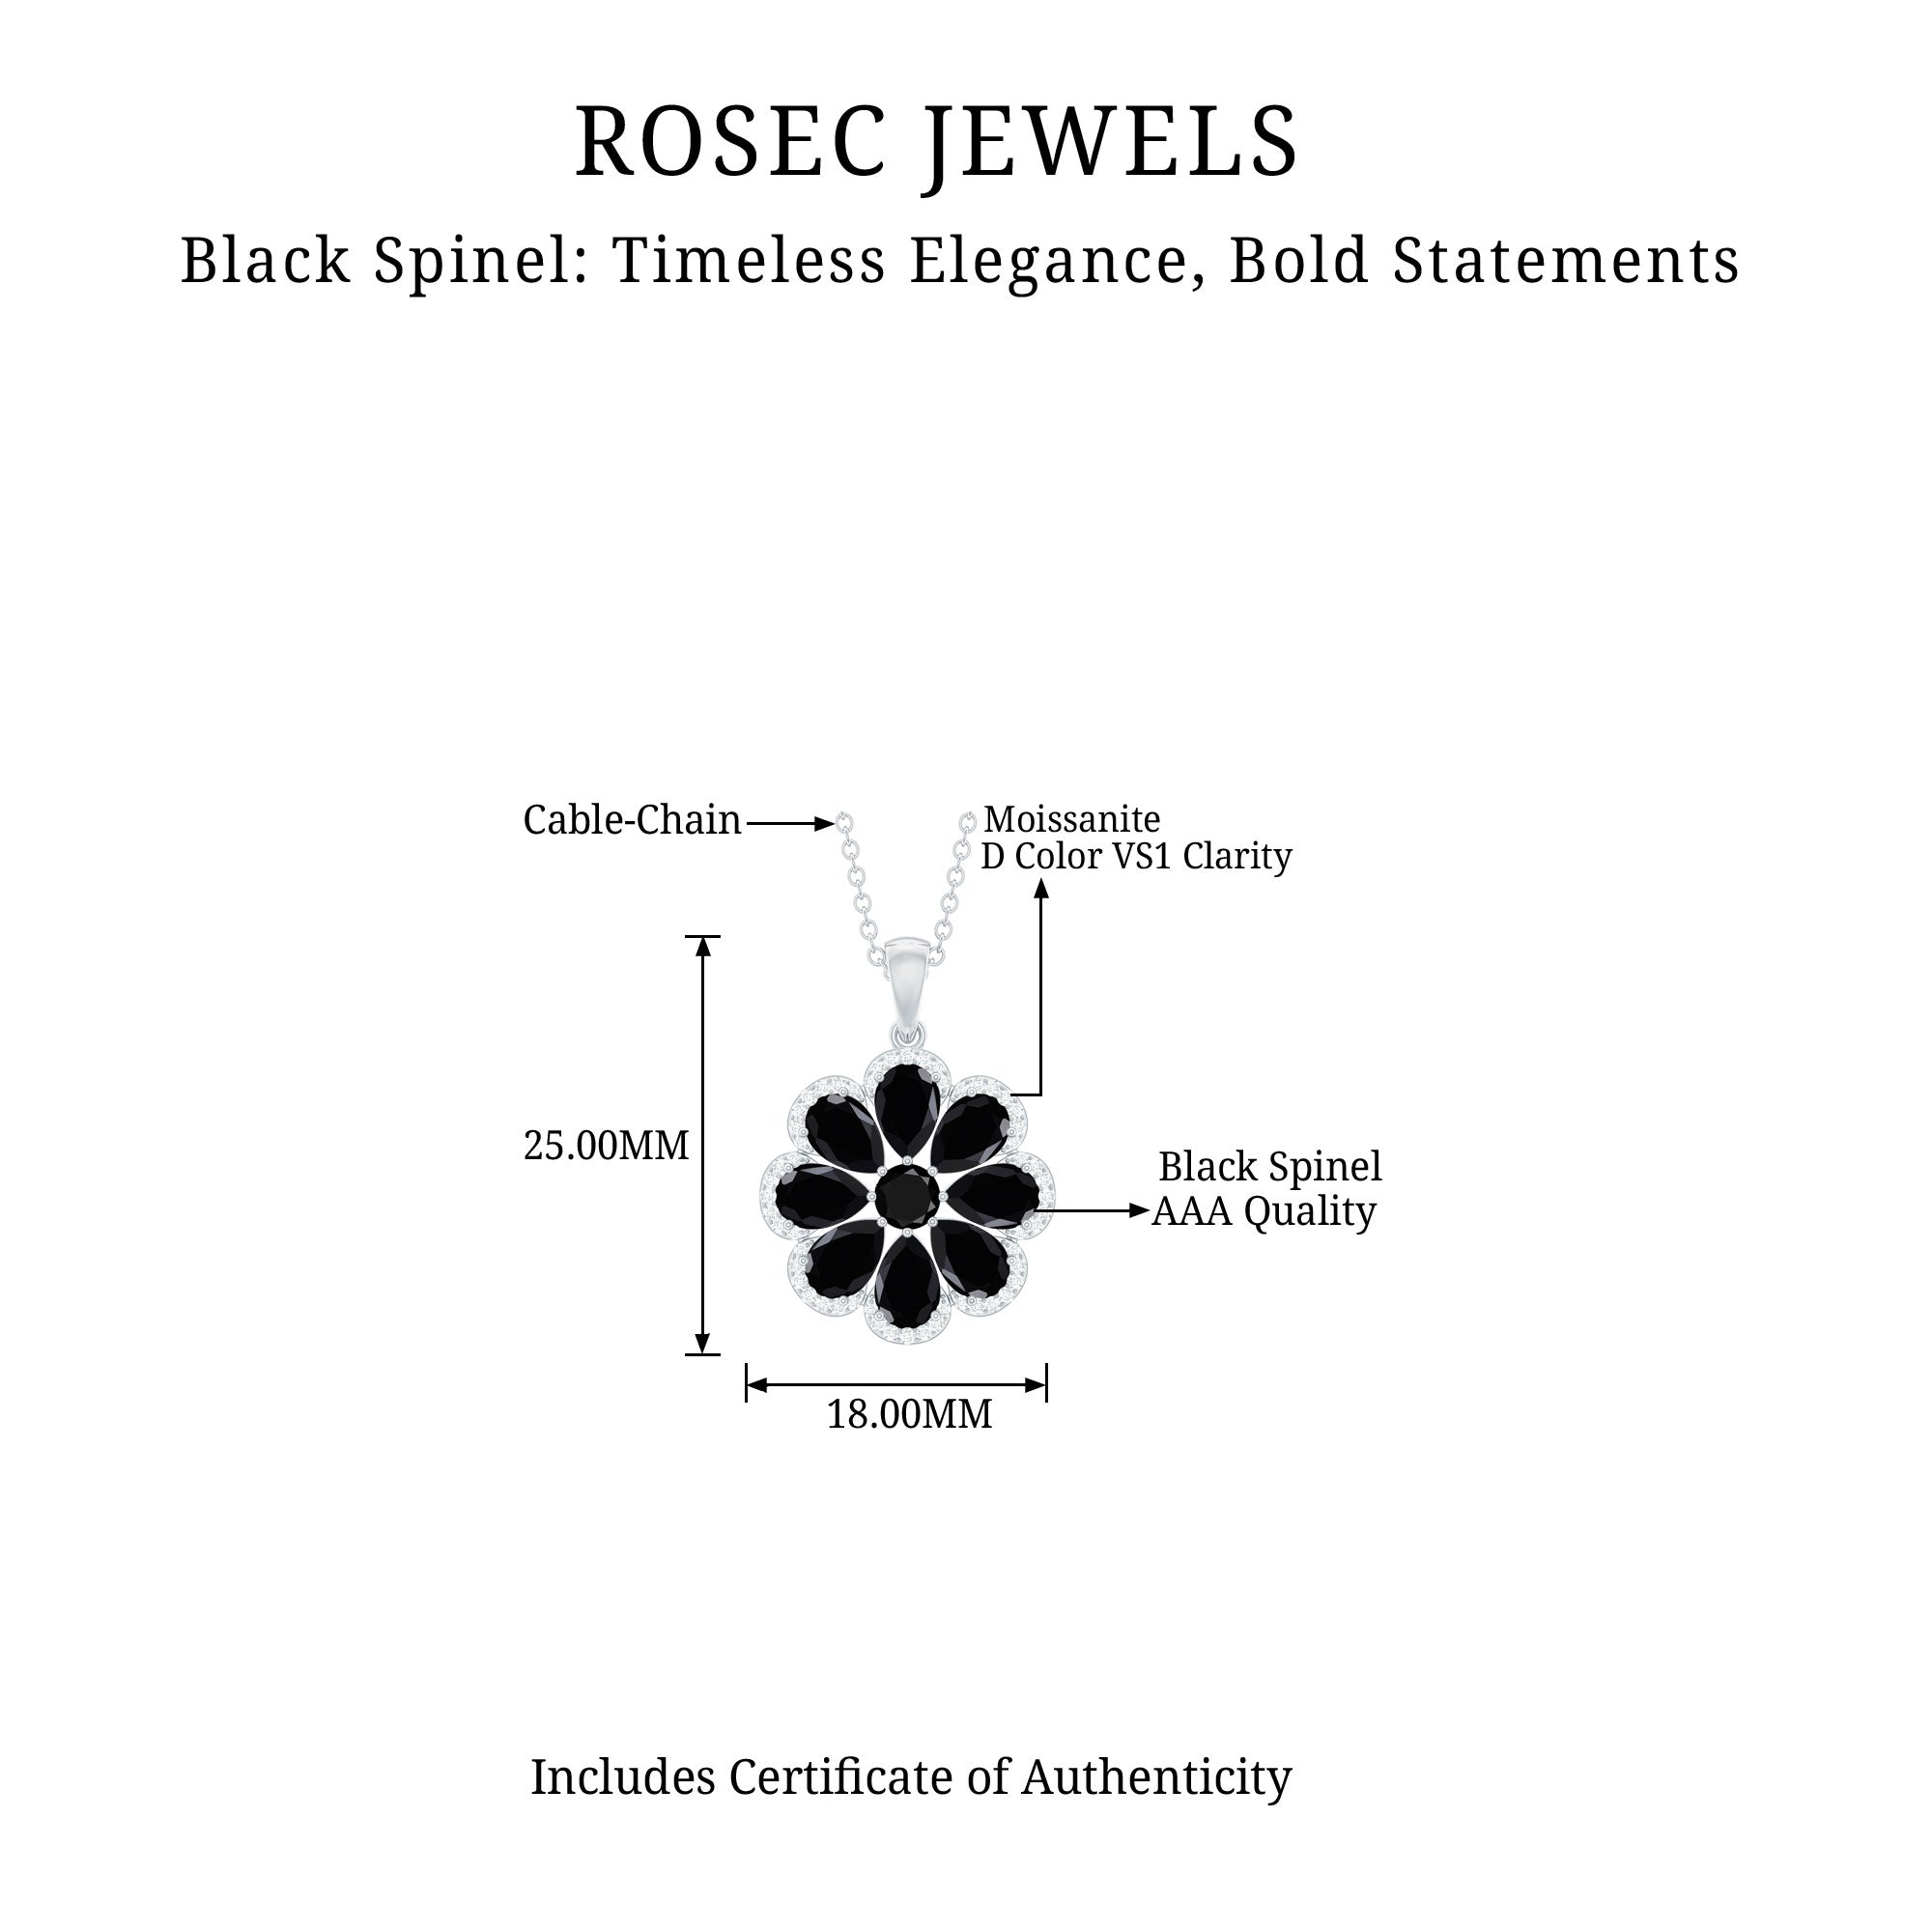 3.25 CT Black Spinel Flower Silver Pendant with Moissanite Halo - Rosec Jewels